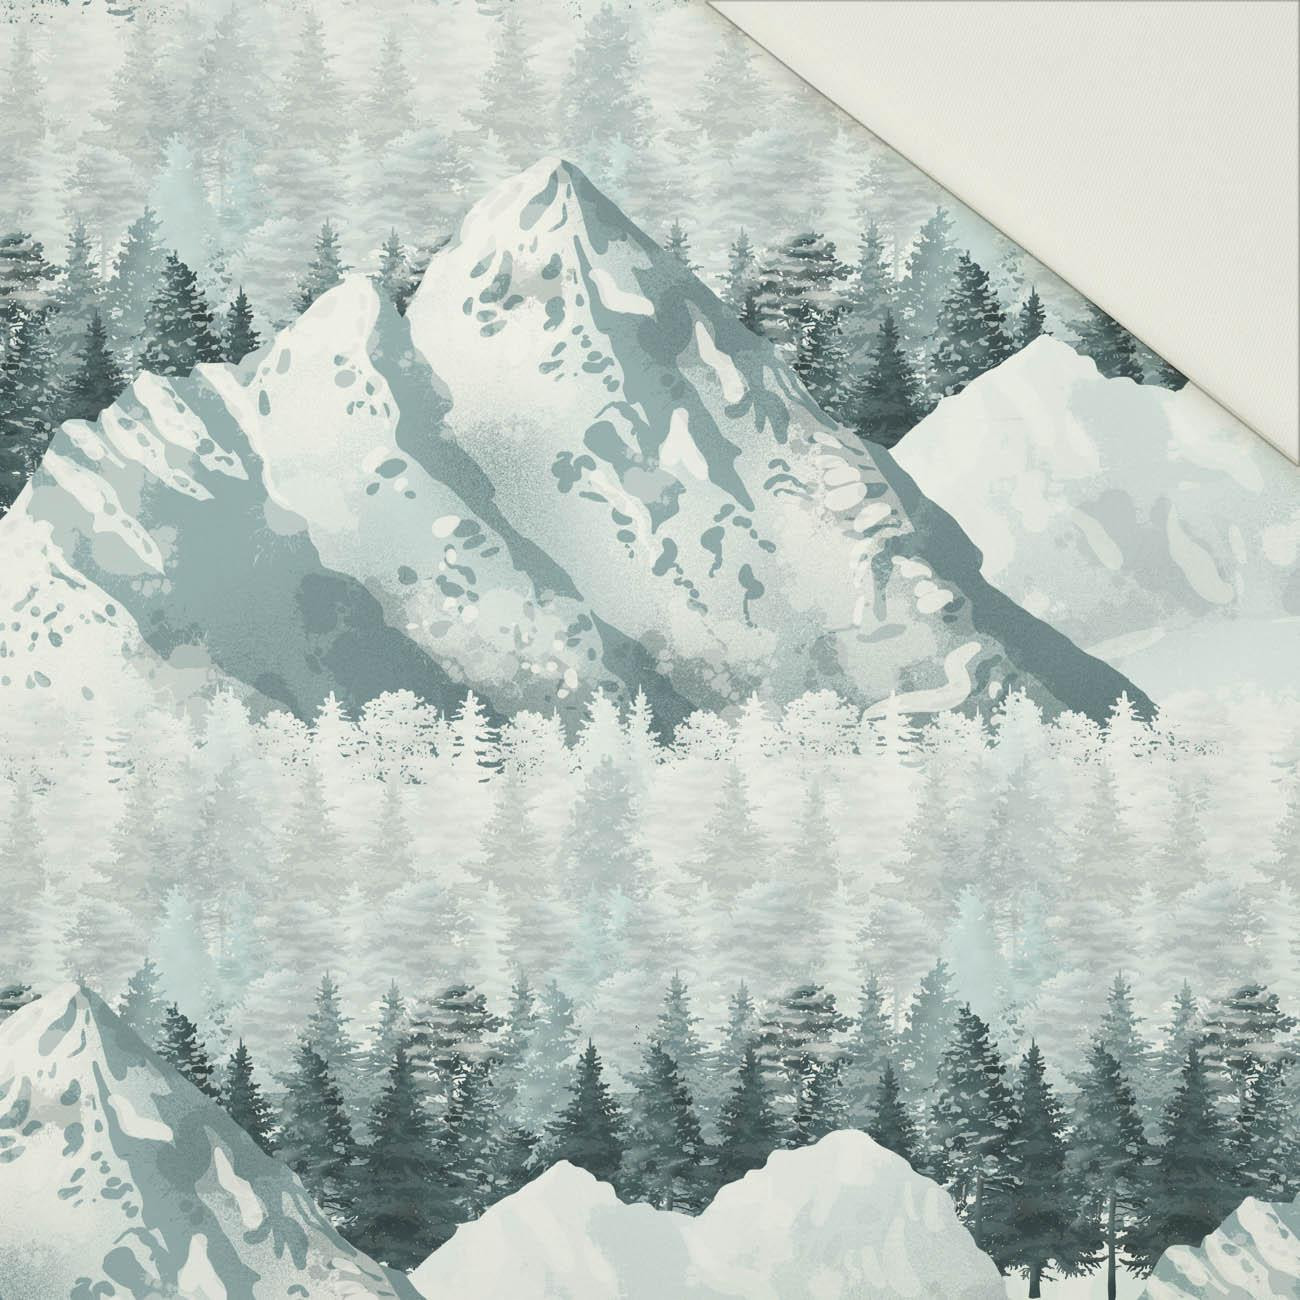 SNOWY PEAKS (WINTER IN MOUNTAINS) / large - Cotton drill